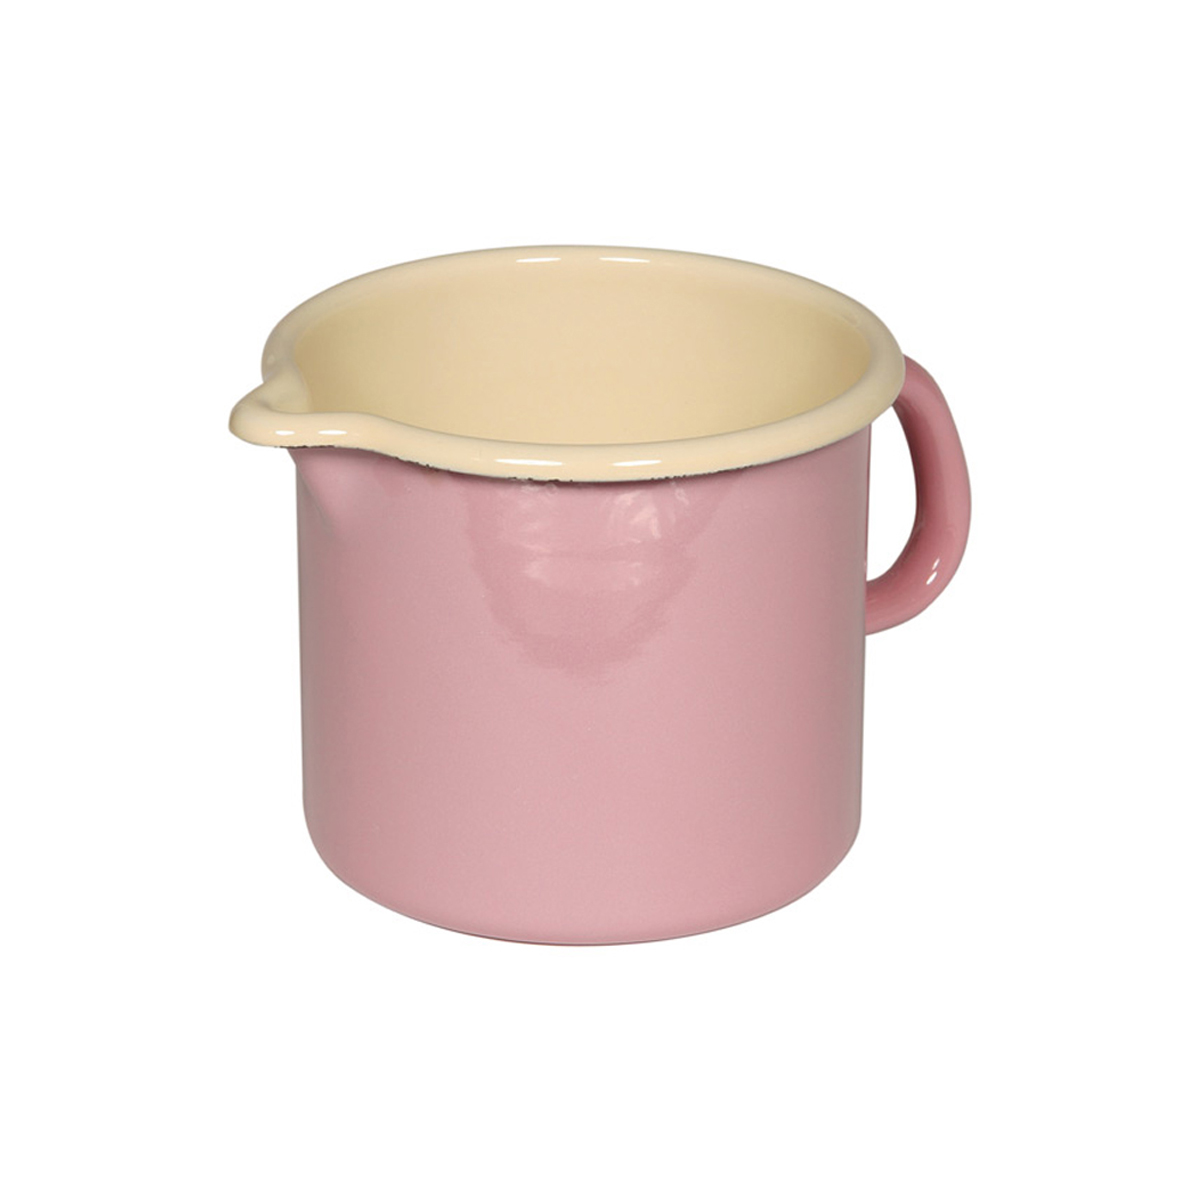 Riess Classic Bunt Pastell Schnabeltopf 12 cm / 1,0 L rosa - Emaille